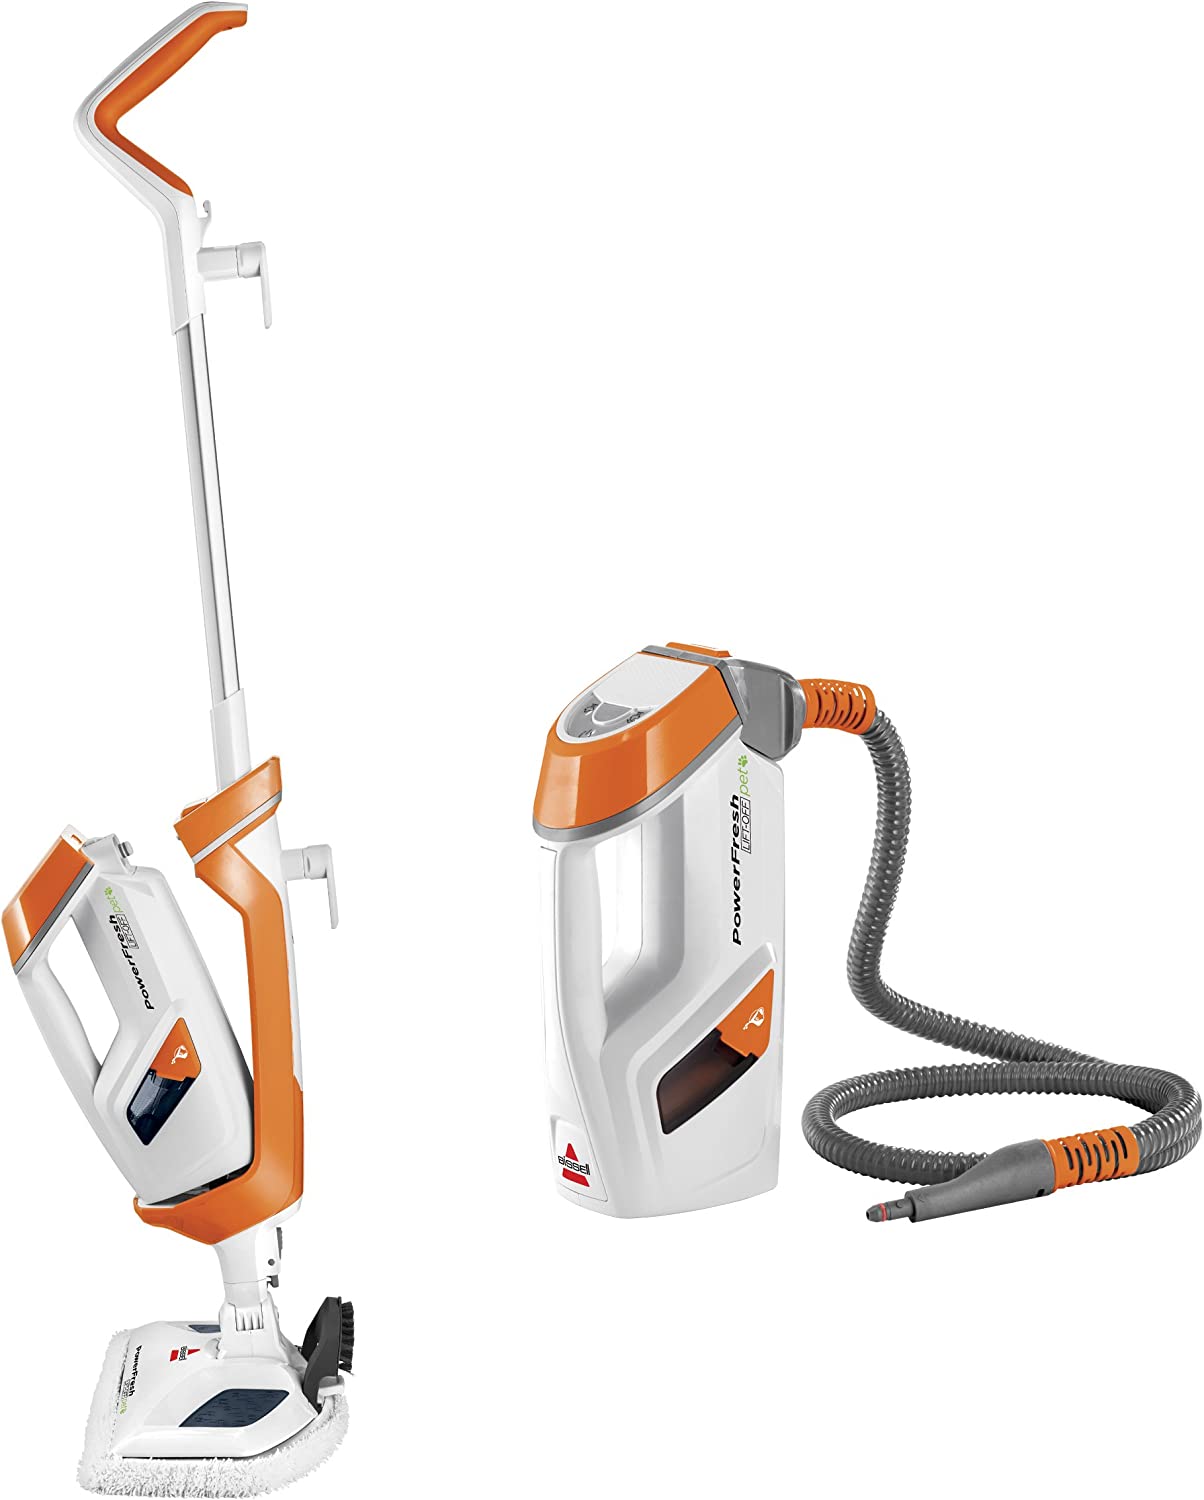 BISSELL PowerFresh Lift-Off Pet 2-in-1 Steam Mop, 1544A - image 1 of 14